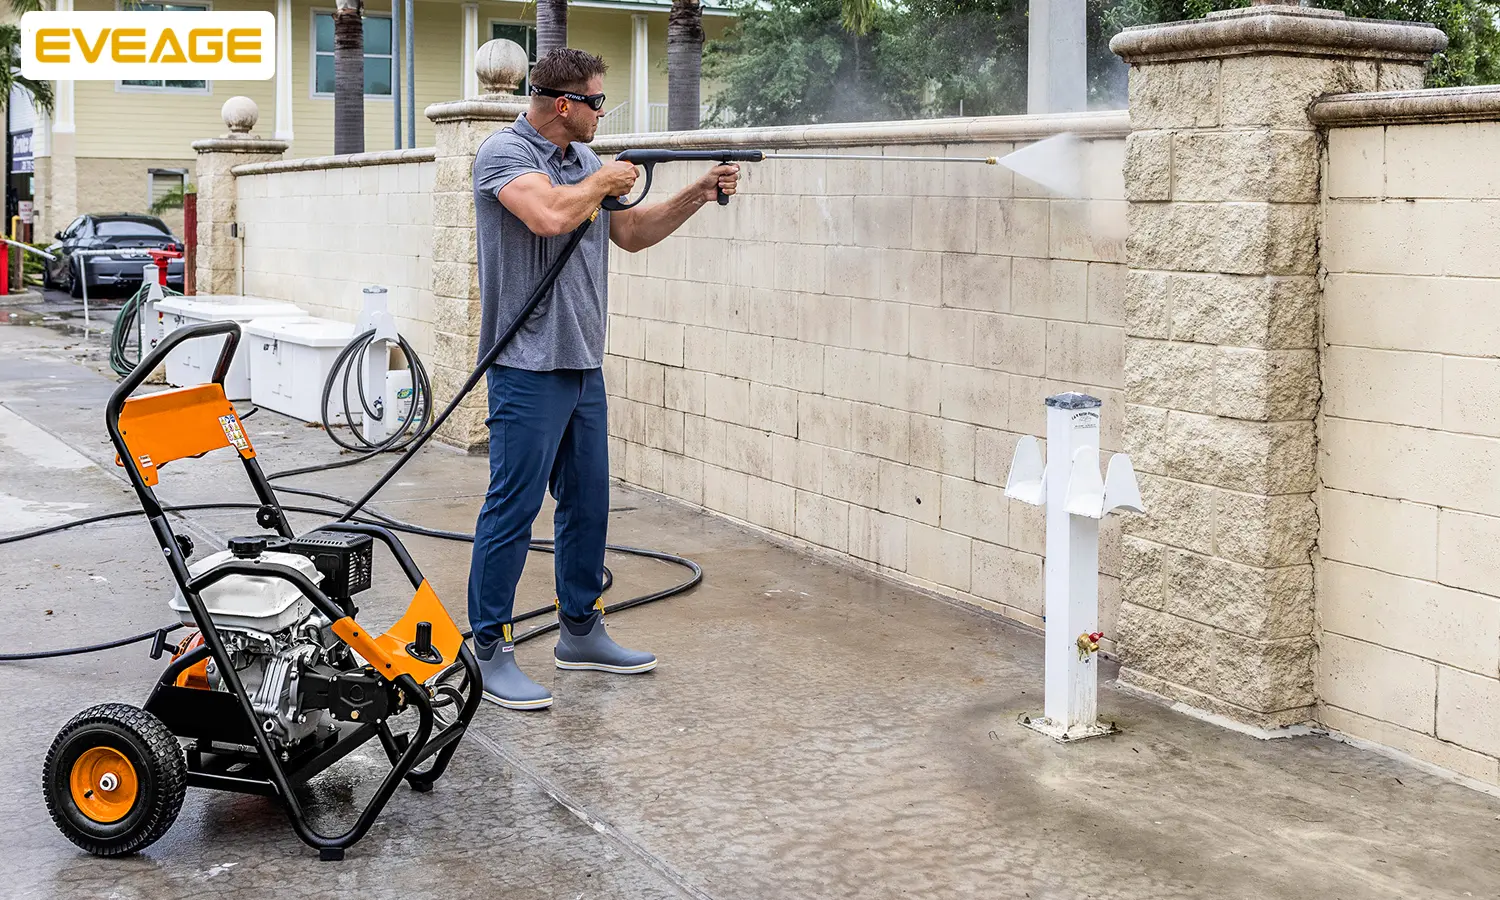 How do you turn a pressure washer into a hose